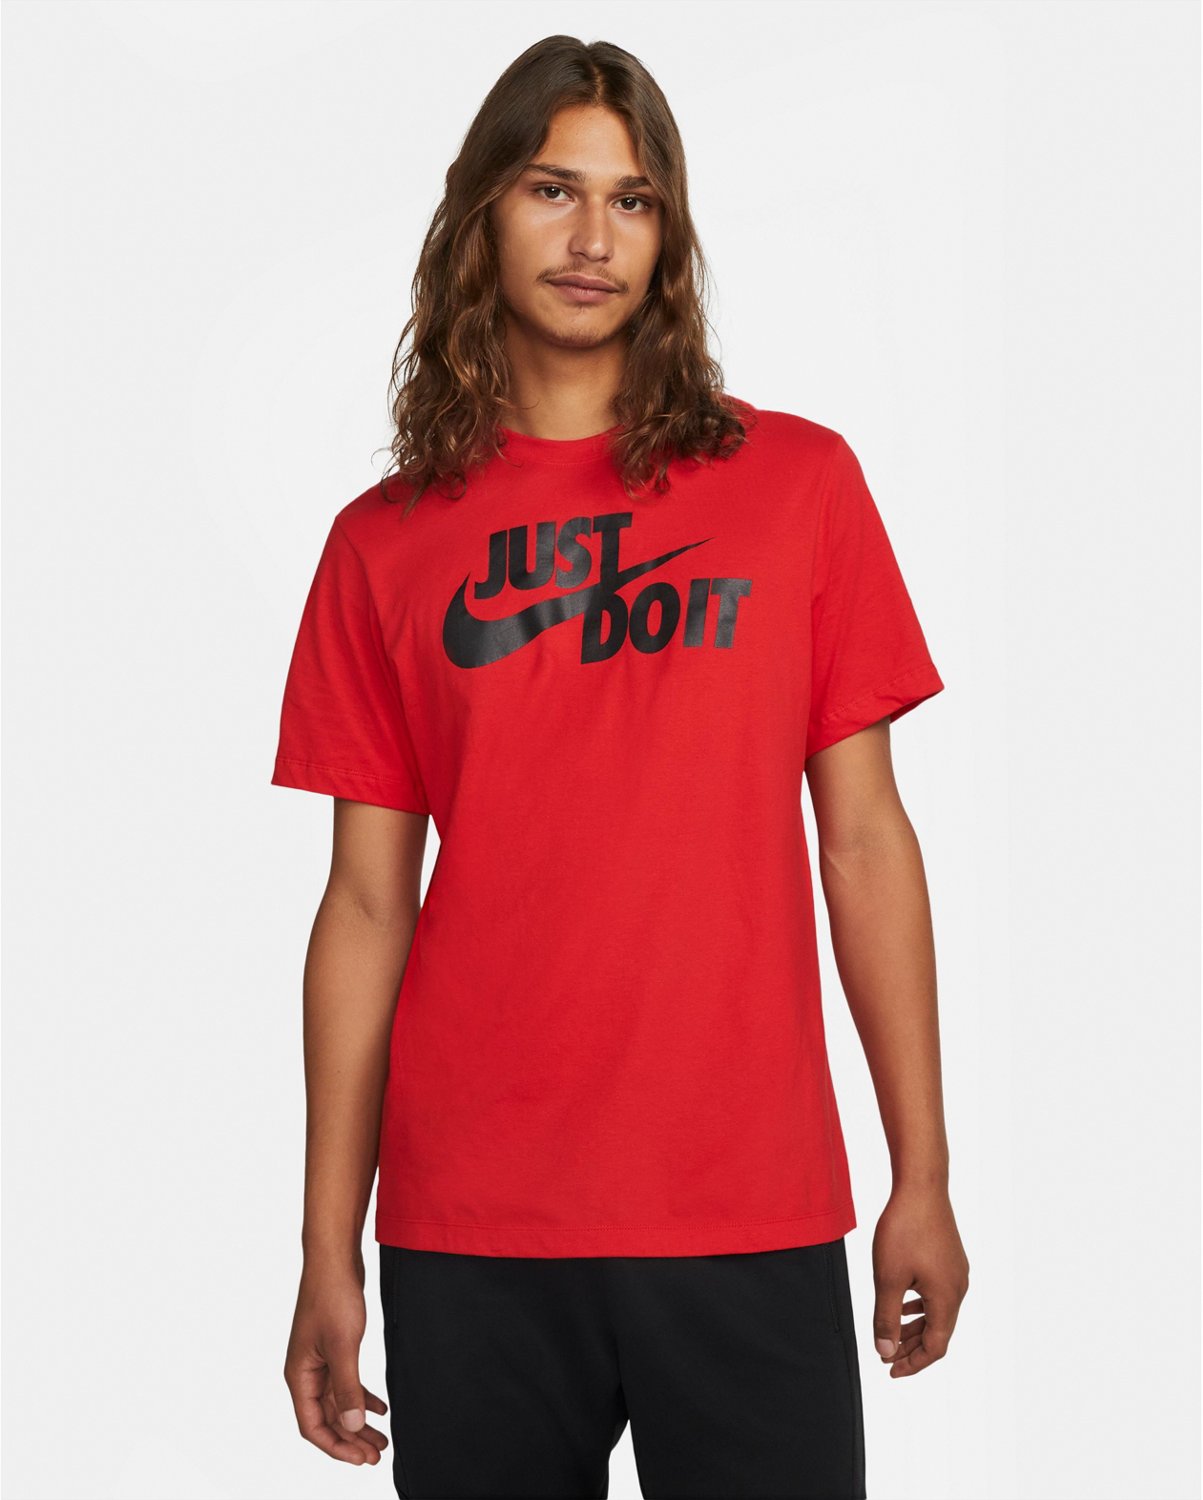 Men\'s | Just Shipping It at Academy Free Nike T-shirt Do